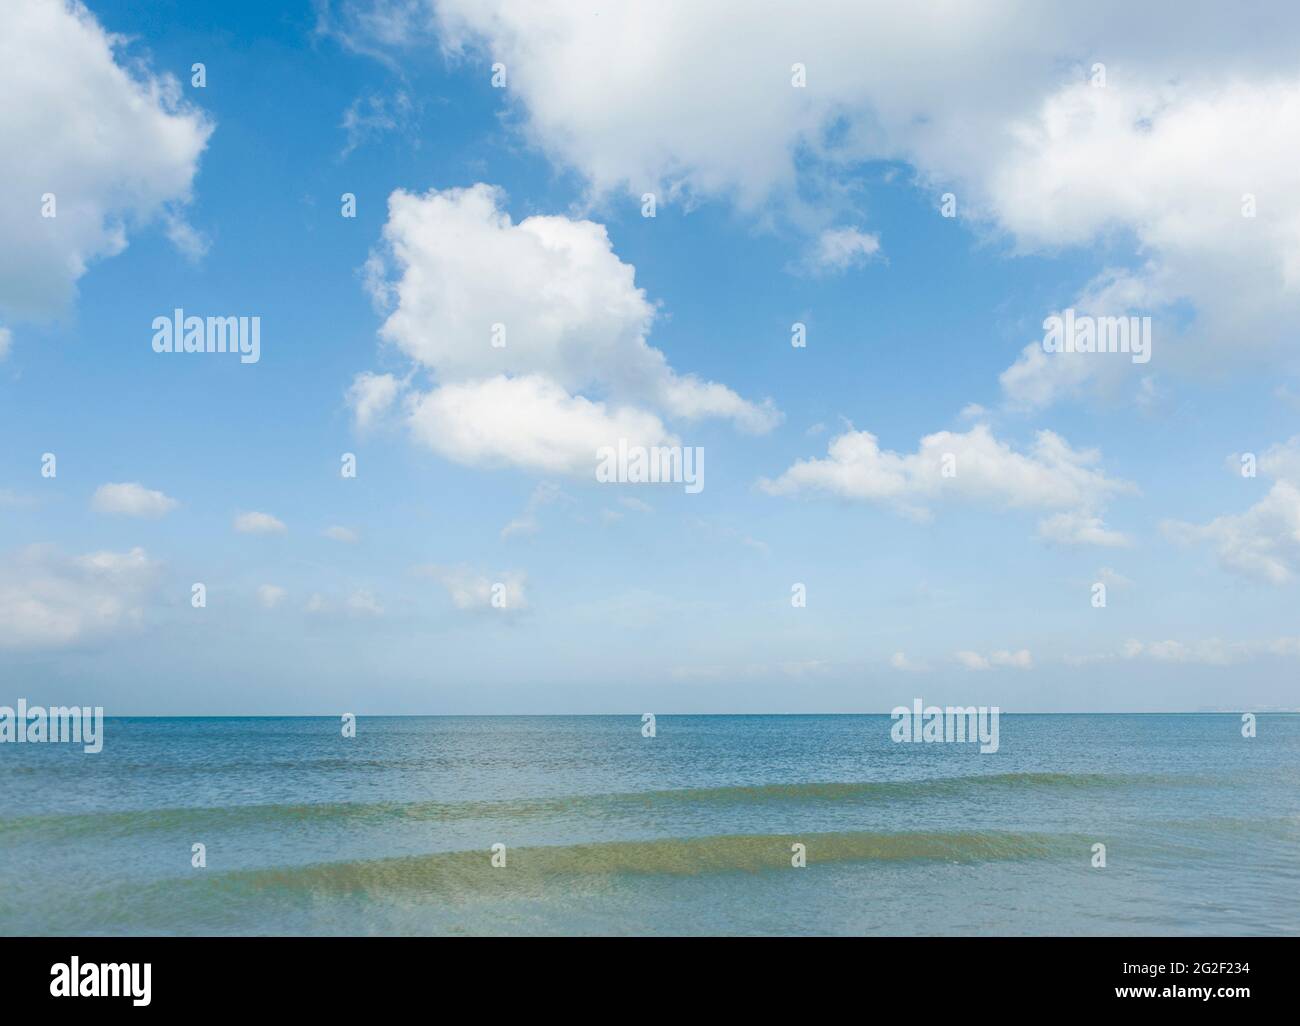 The sea seen from the beach at Deauville, France Stock Photo